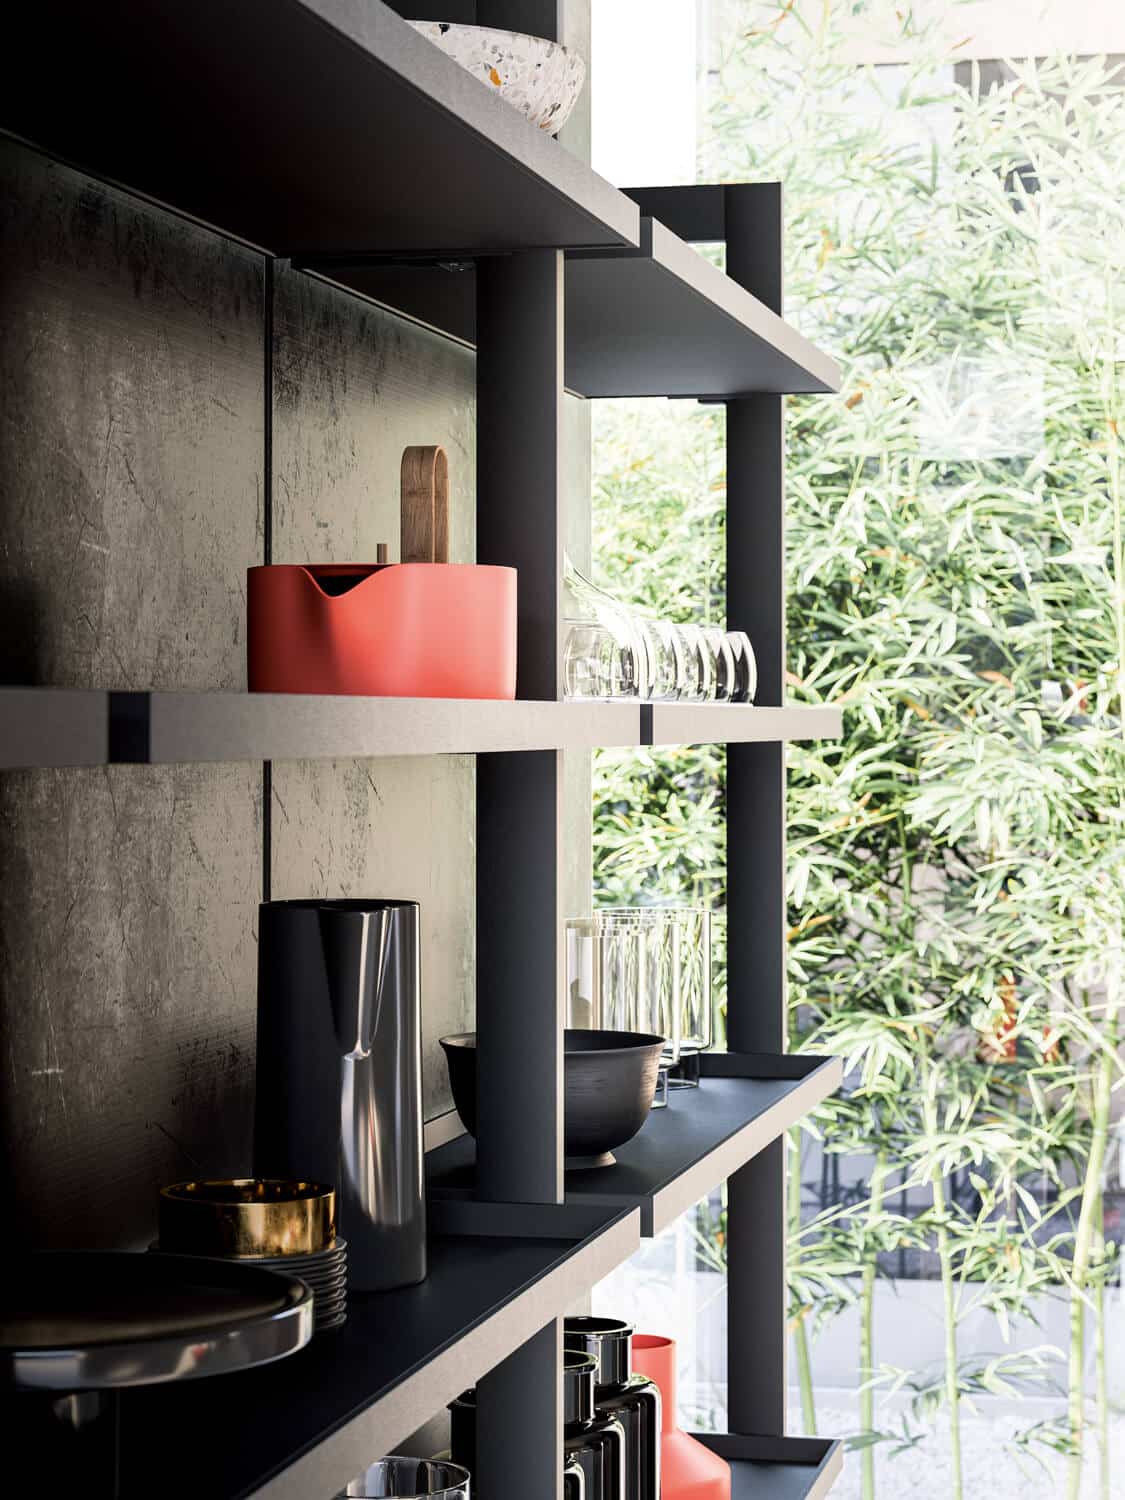 Detail of the Palo open shelving system for the wall.